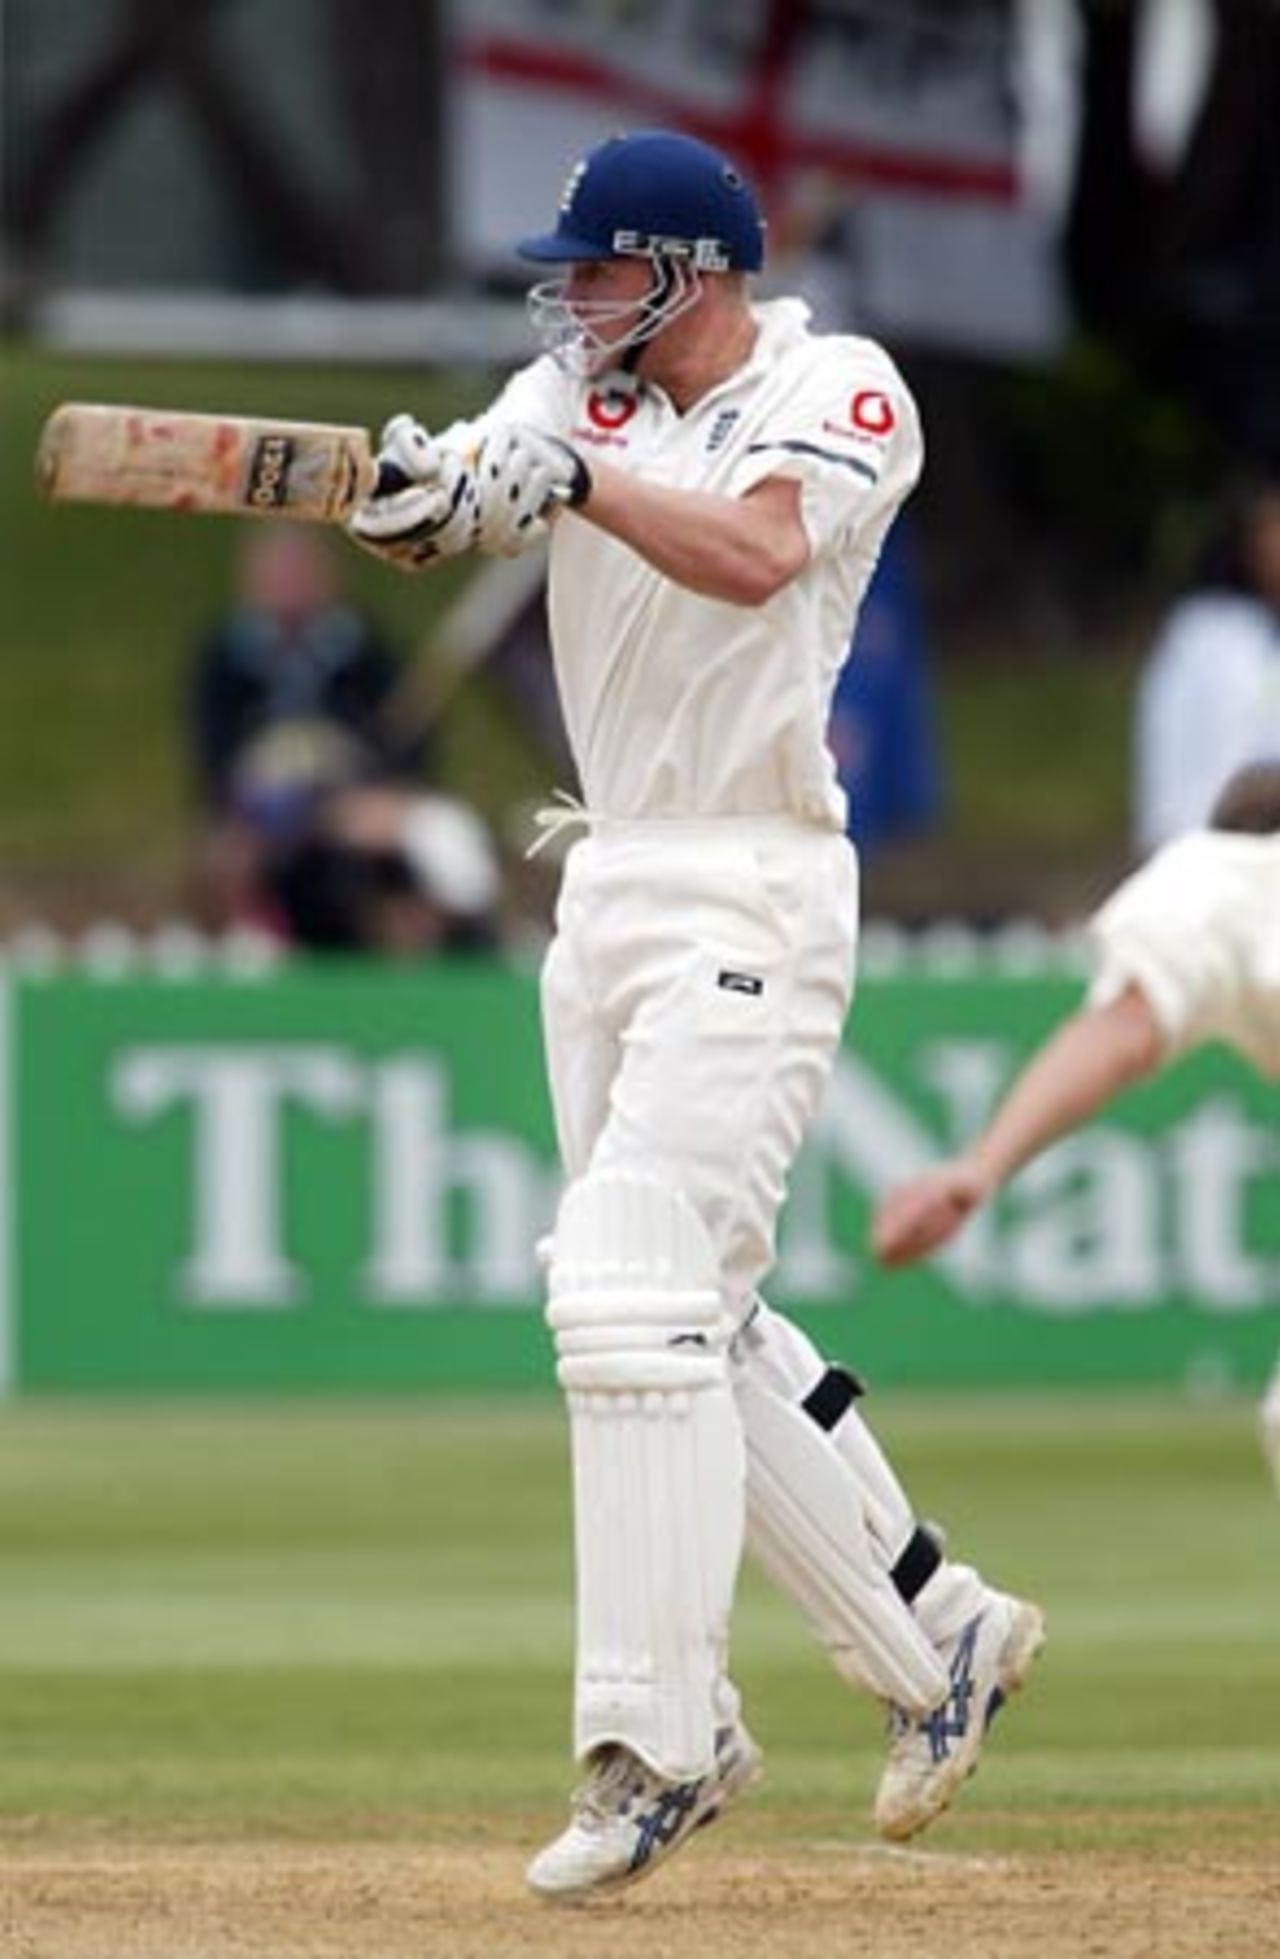 England batsman Andrew Flintoff cuts a short delivery during his second innings of 75. 2nd Test: New Zealand v England at Basin Reserve, Wellington, 21-25 March 2002 (25 March 2002).